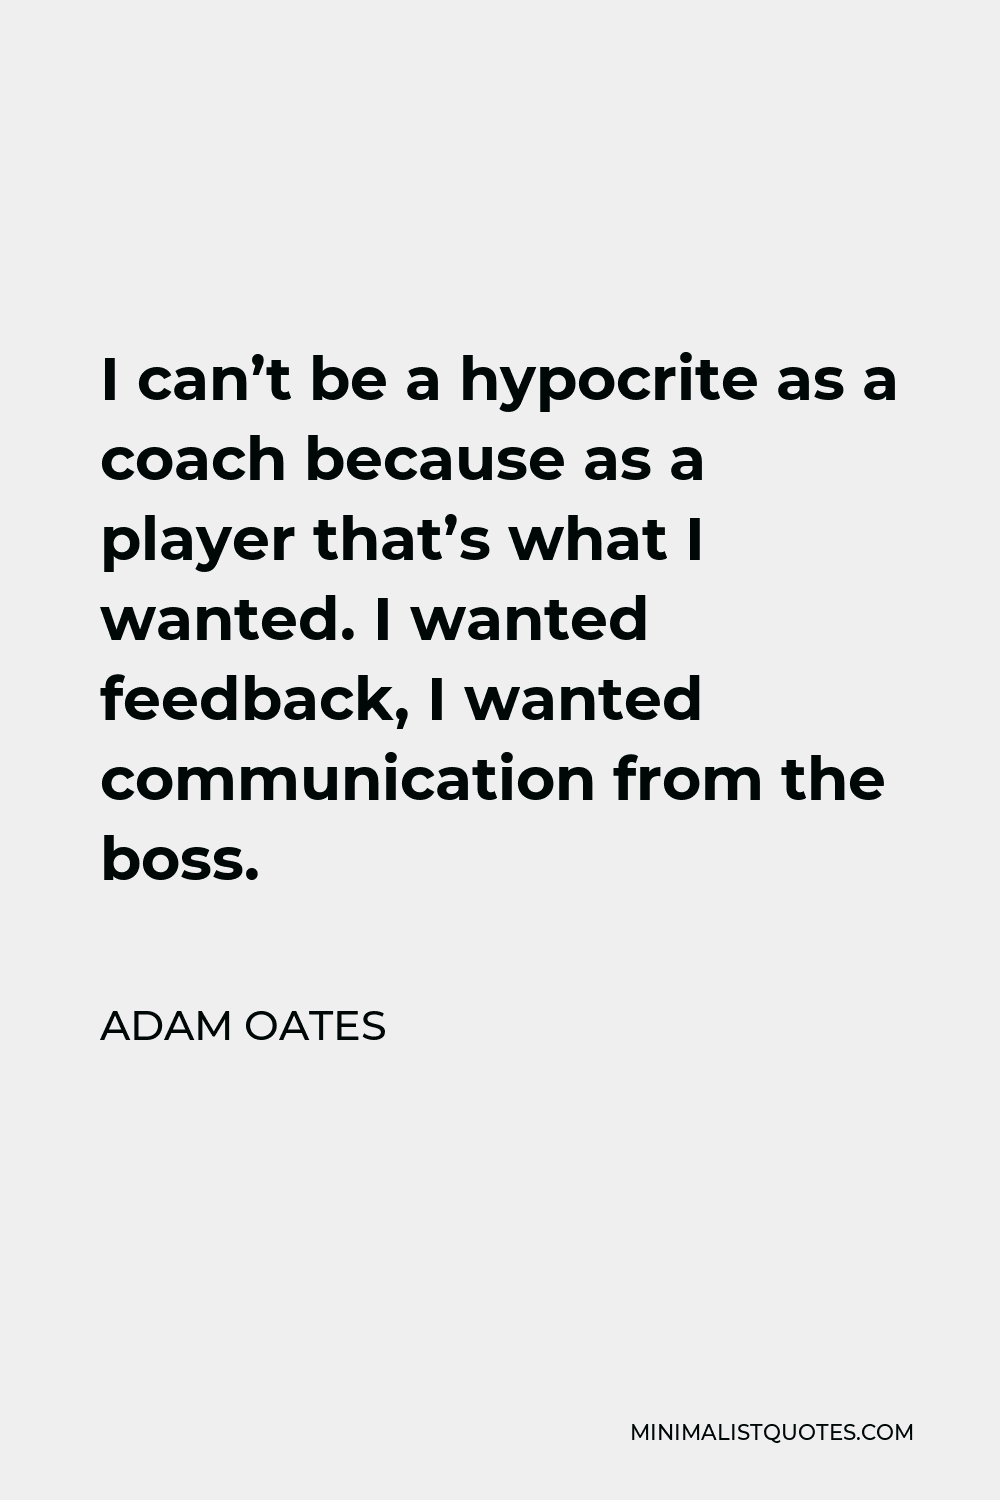 Adam Oates Quote - I can’t be a hypocrite as a coach because as a player that’s what I wanted. I wanted feedback, I wanted communication from the boss.